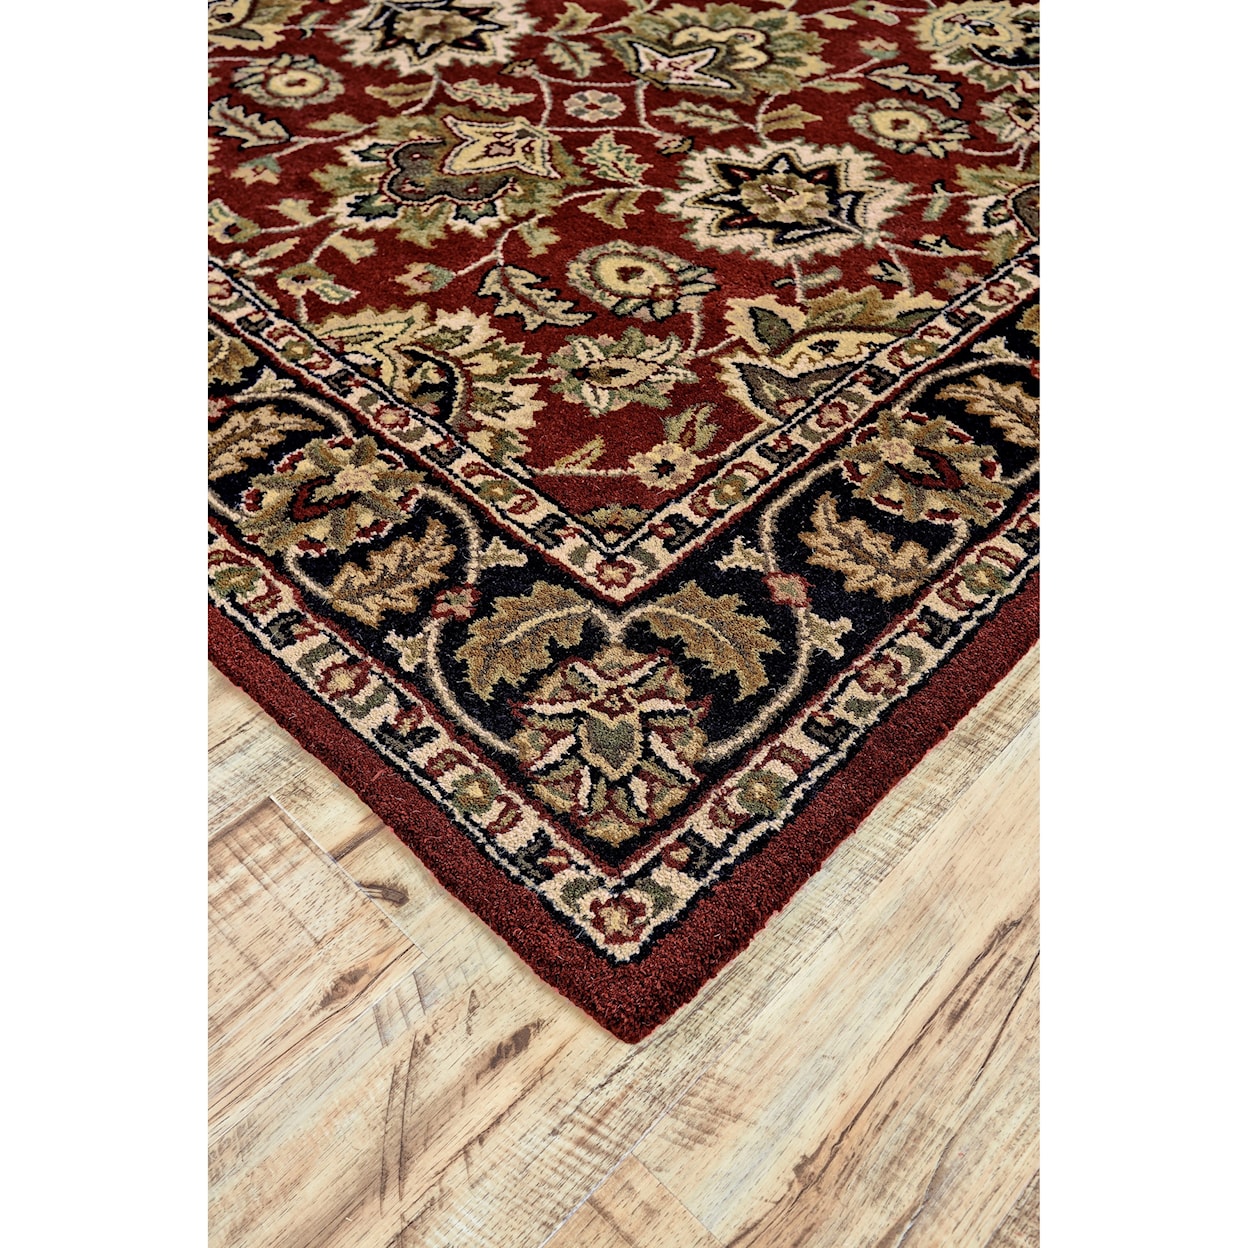 Feizy Rugs Yale Red/Black 8' x 8' Round Area Rug